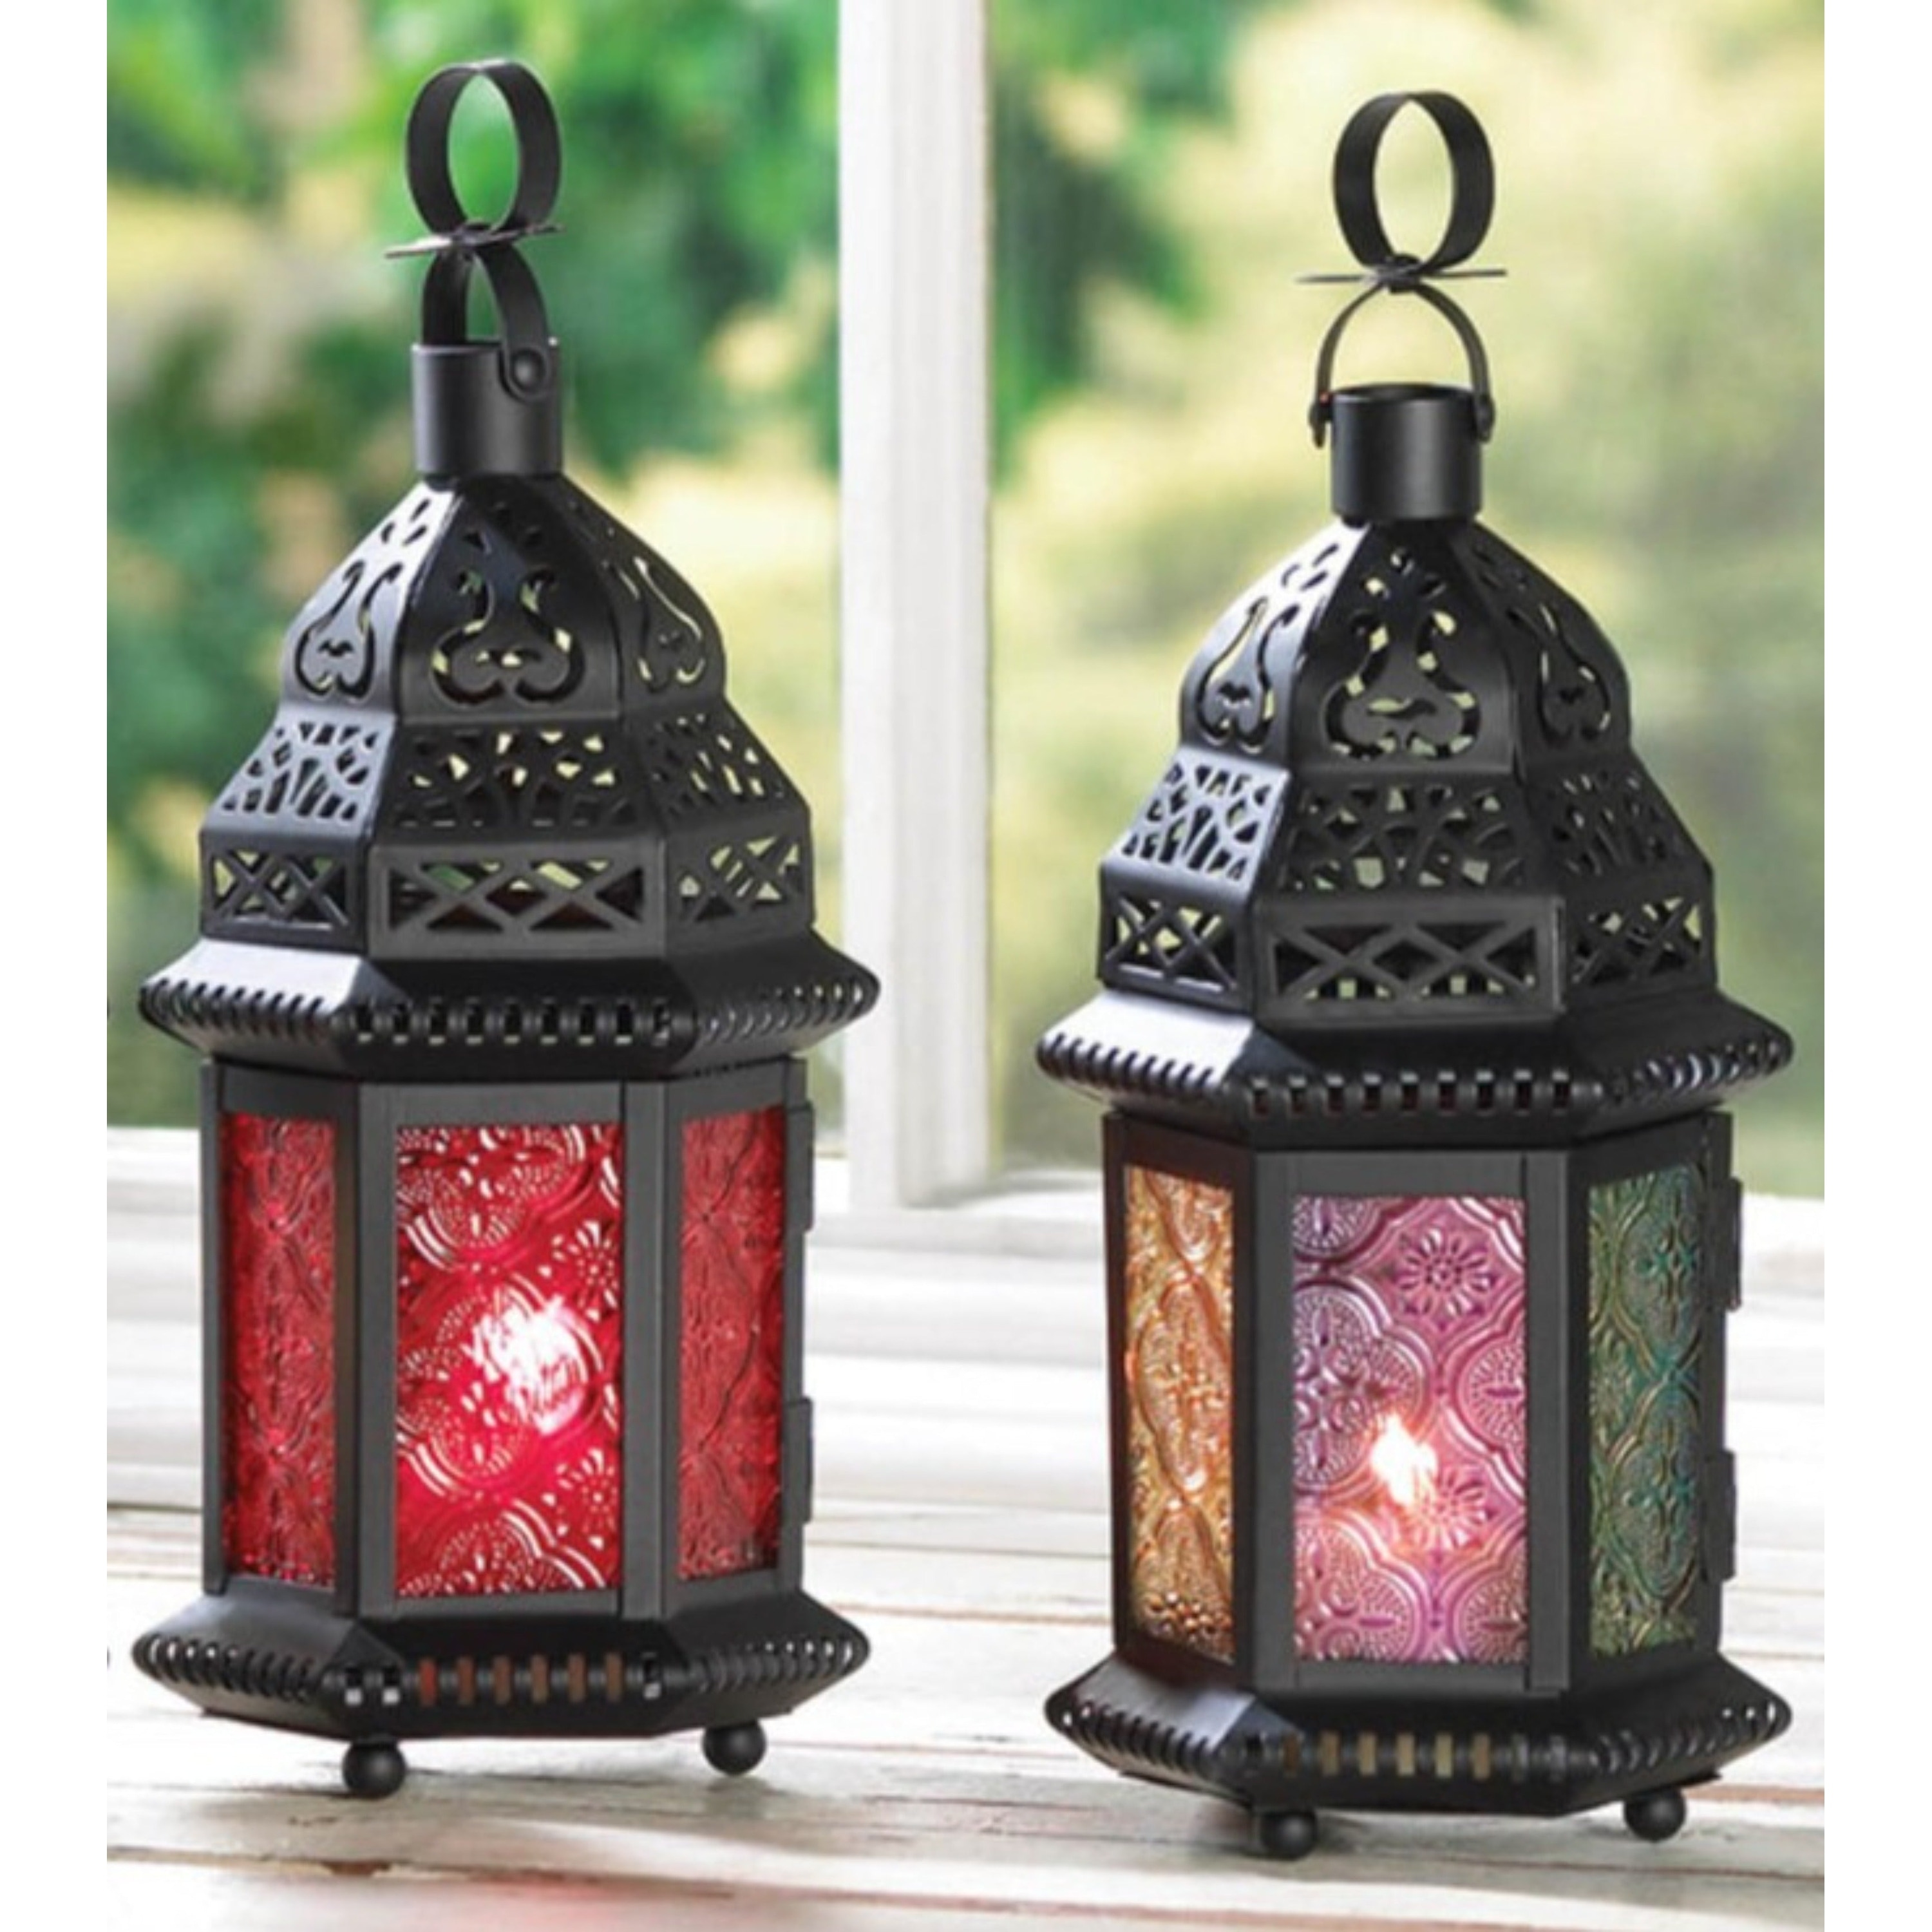 3 lot christmas RED Moroccan Candle holder Lantern Lamp light table centerpiece 